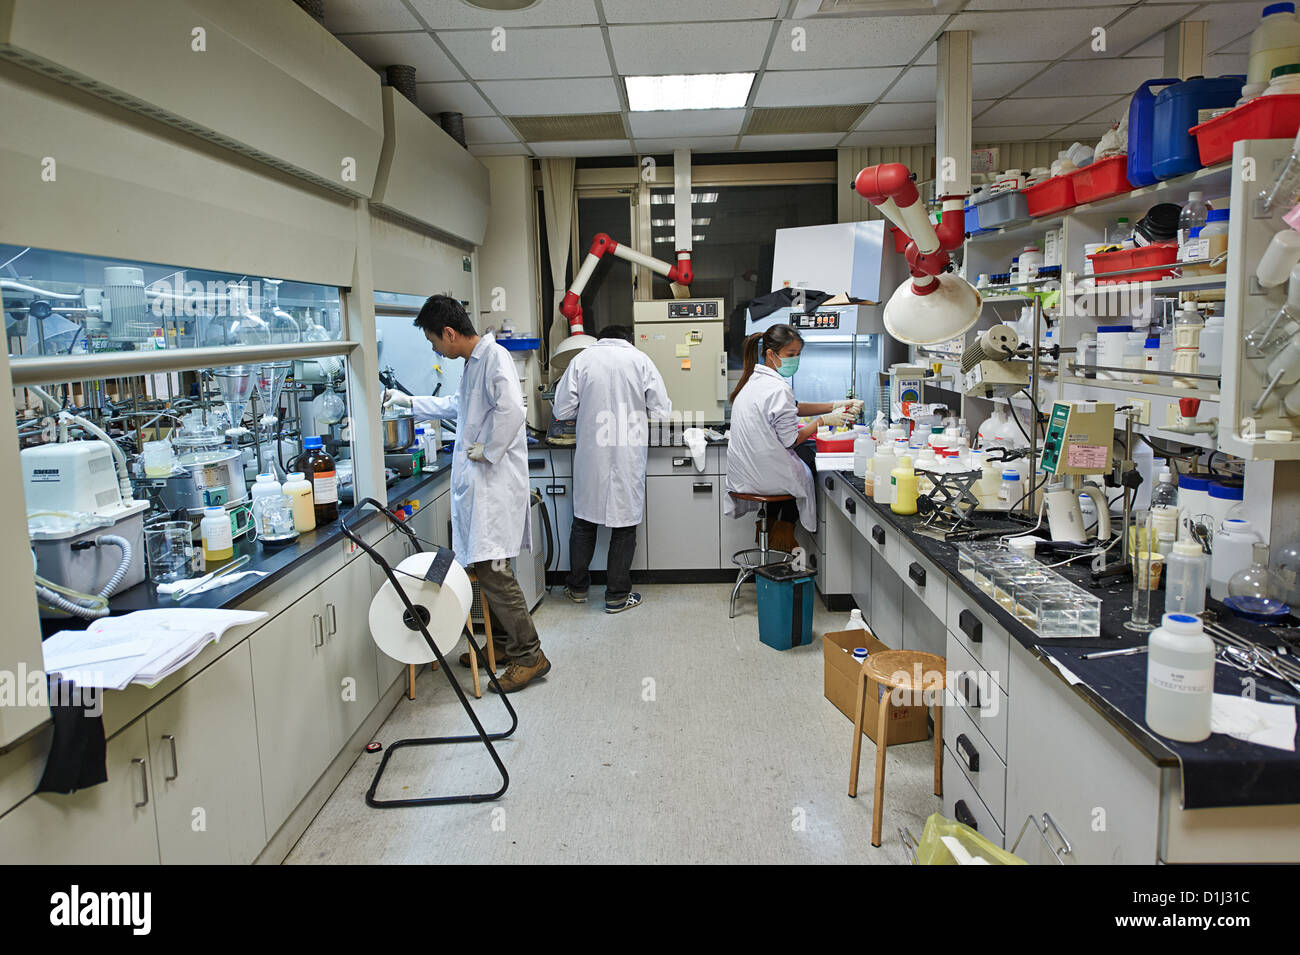 Lab workers researching ingredients and chemicals at a textile and fabric manufacture Stock Photo